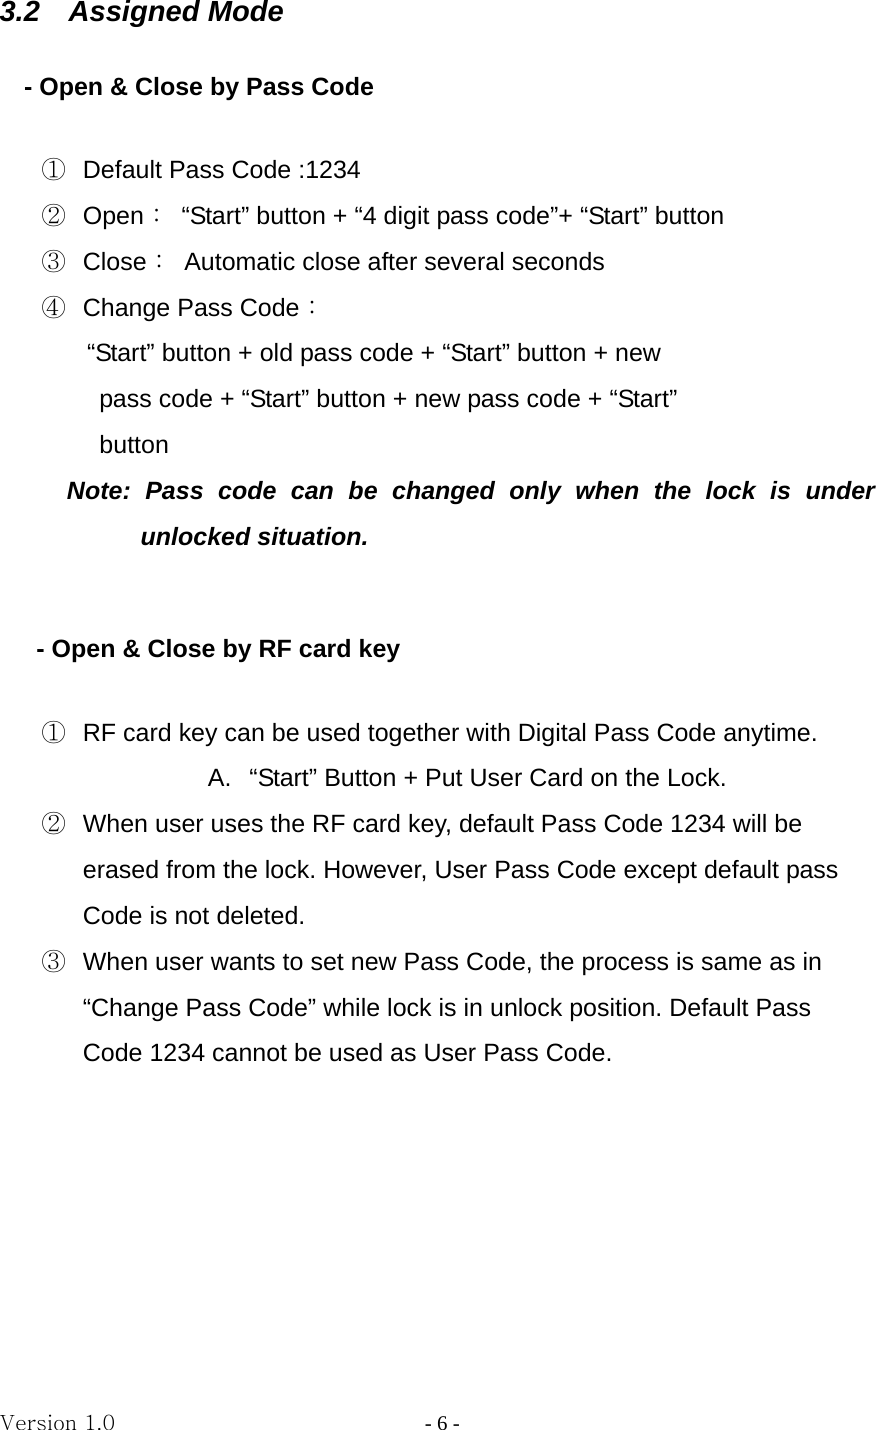 Version 1.0                - 6 - 3.2  Assigned Mode      - Open &amp; Close by Pass Code  ①  Default Pass Code :1234 ②  Open：  “Start” button + “4 digit pass code”+ “Start” button ③  Close：  Automatic close after several seconds ④  Change Pass Code：   “Start” button + old pass code + “Start” button + new   pass code + “Start” button + new pass code + “Start”   button Note: Pass code can be changed only when the lock is under unlocked situation.          - Open &amp; Close by RF card key  ①  RF card key can be used together with Digital Pass Code anytime.   A.  “Start” Button + Put User Card on the Lock. ②  When user uses the RF card key, default Pass Code 1234 will be erased from the lock. However, User Pass Code except default pass Code is not deleted. ③  When user wants to set new Pass Code, the process is same as in “Change Pass Code” while lock is in unlock position. Default Pass   Code 1234 cannot be used as User Pass Code.          